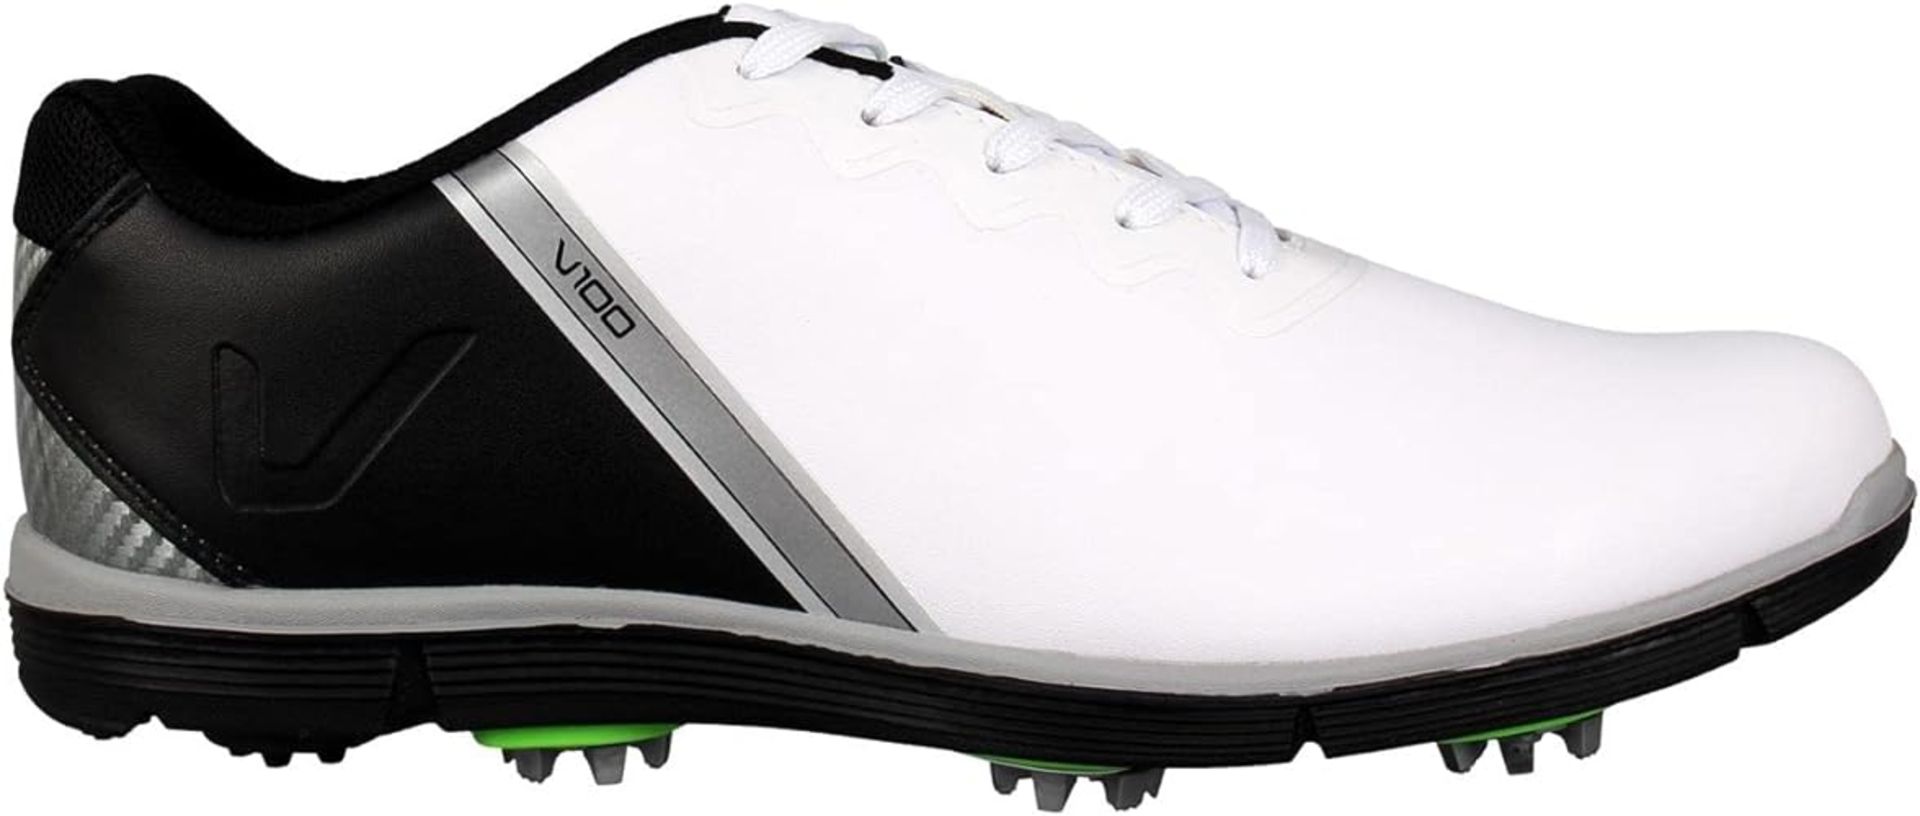 2 X BRAND NEW PAIRS OF SLAZENGER V100 PROFESSIONAL GOLF SHOES SIZE 7 RRP £89 EACH S1RA